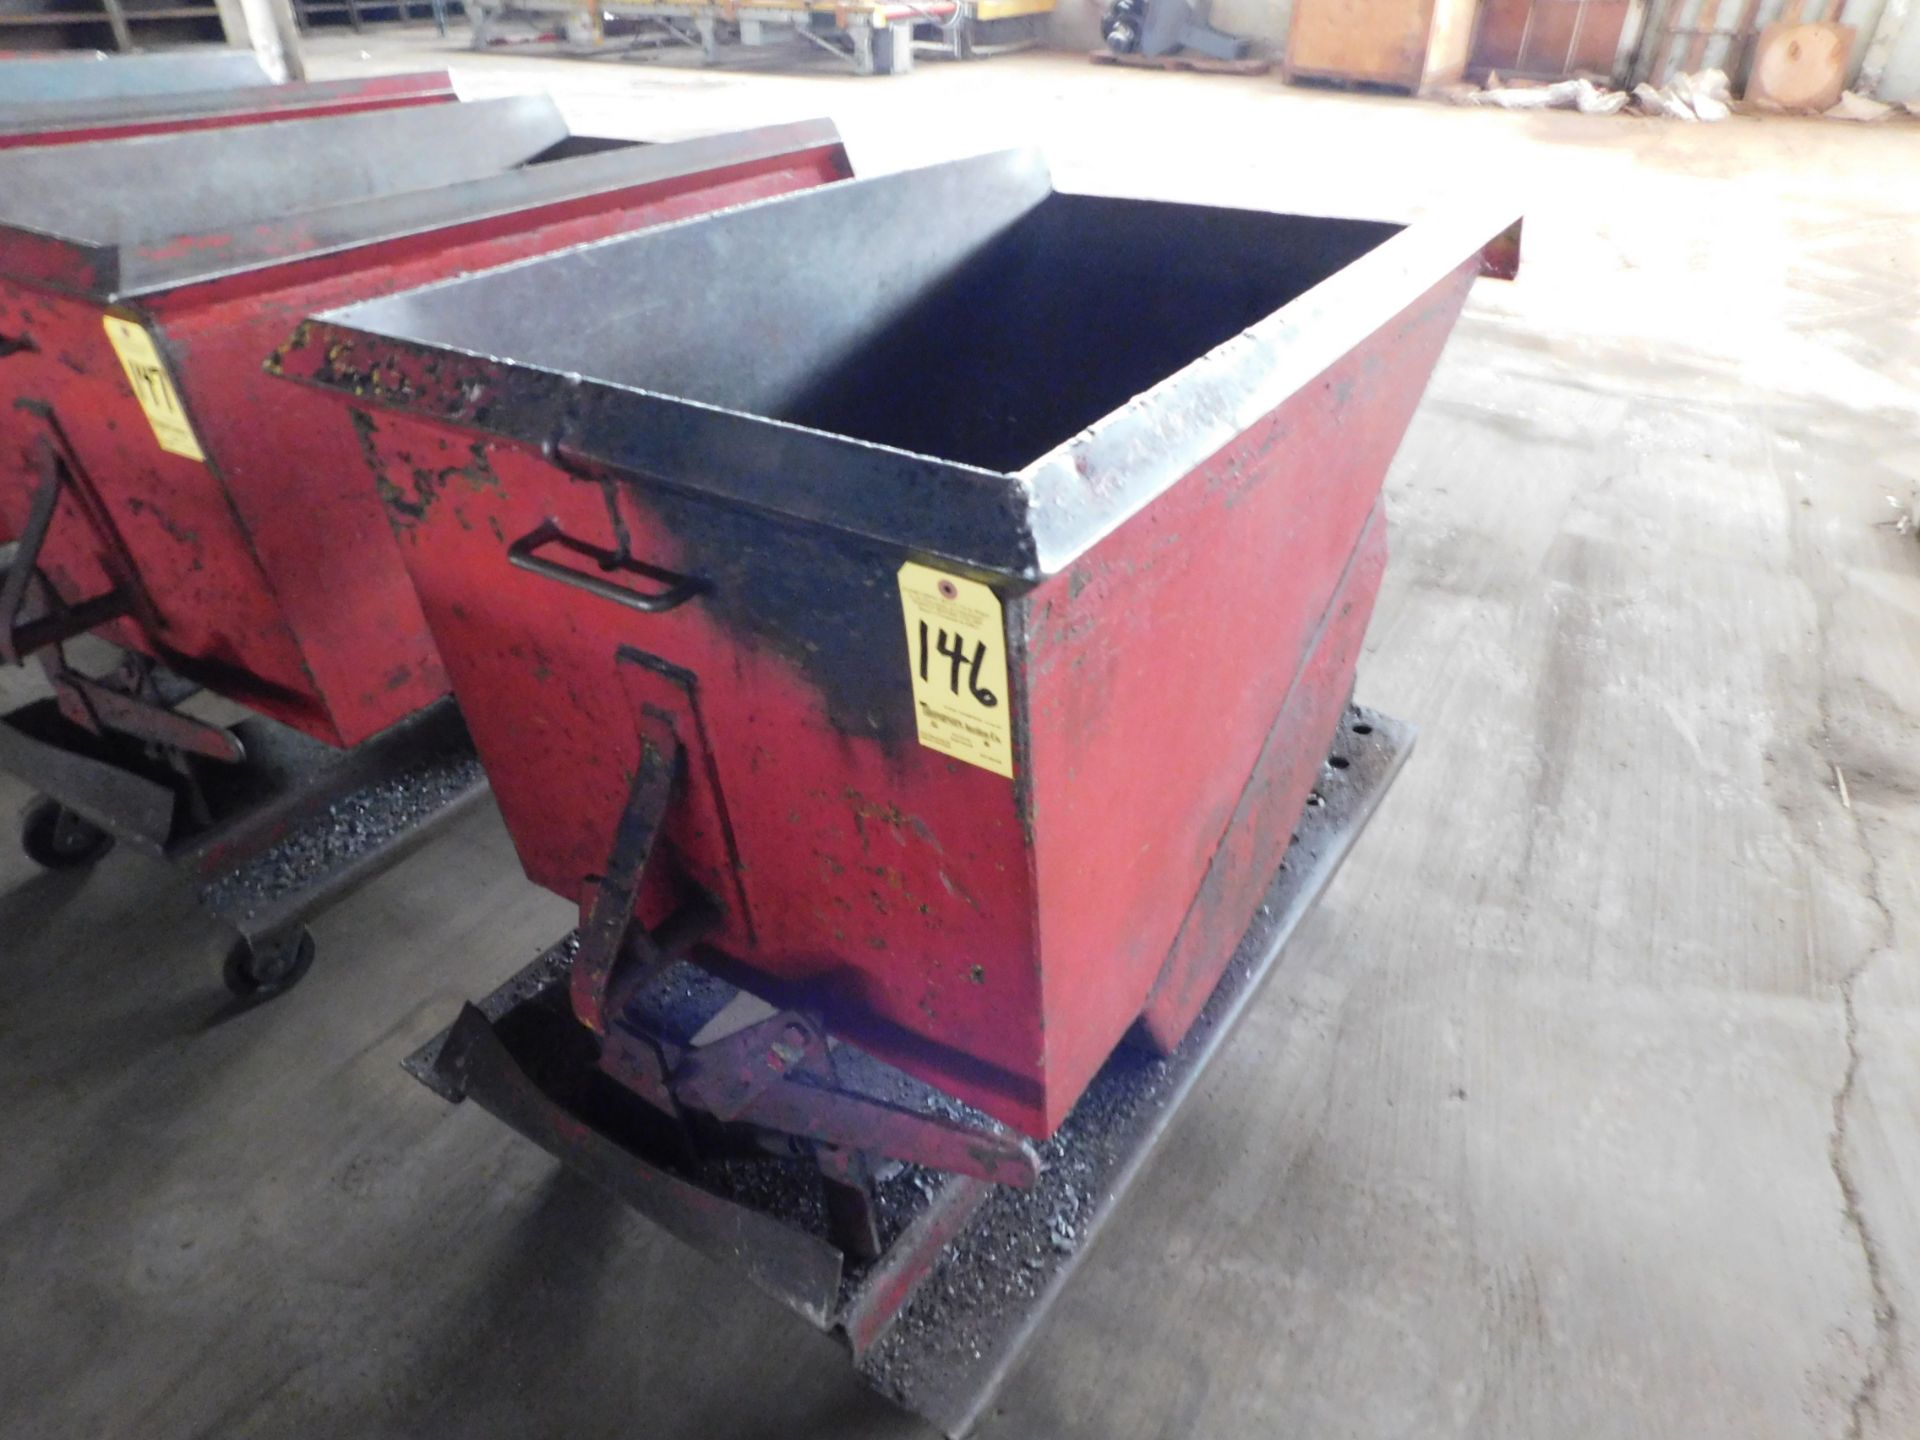 Self Dumping Hopper (Red), Approx. 1/4 Yd. Capacity, on Casters